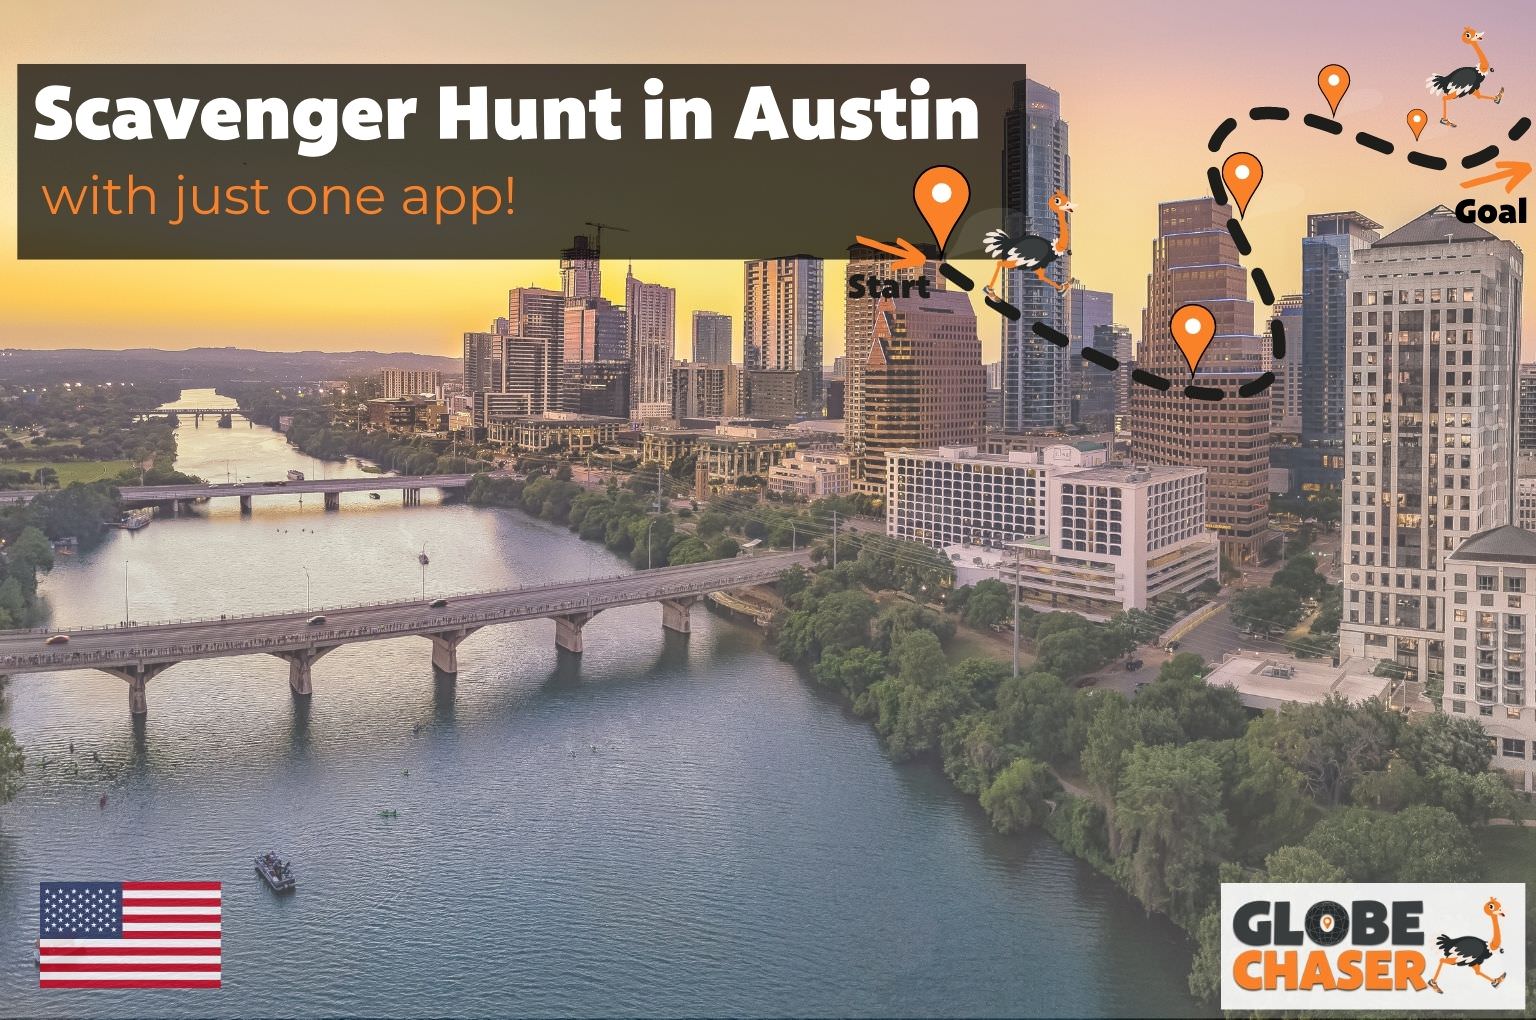 Scavenger Hunt in Austin, USA - Family Activities with the Globe Chaser App for Outdoor Fun